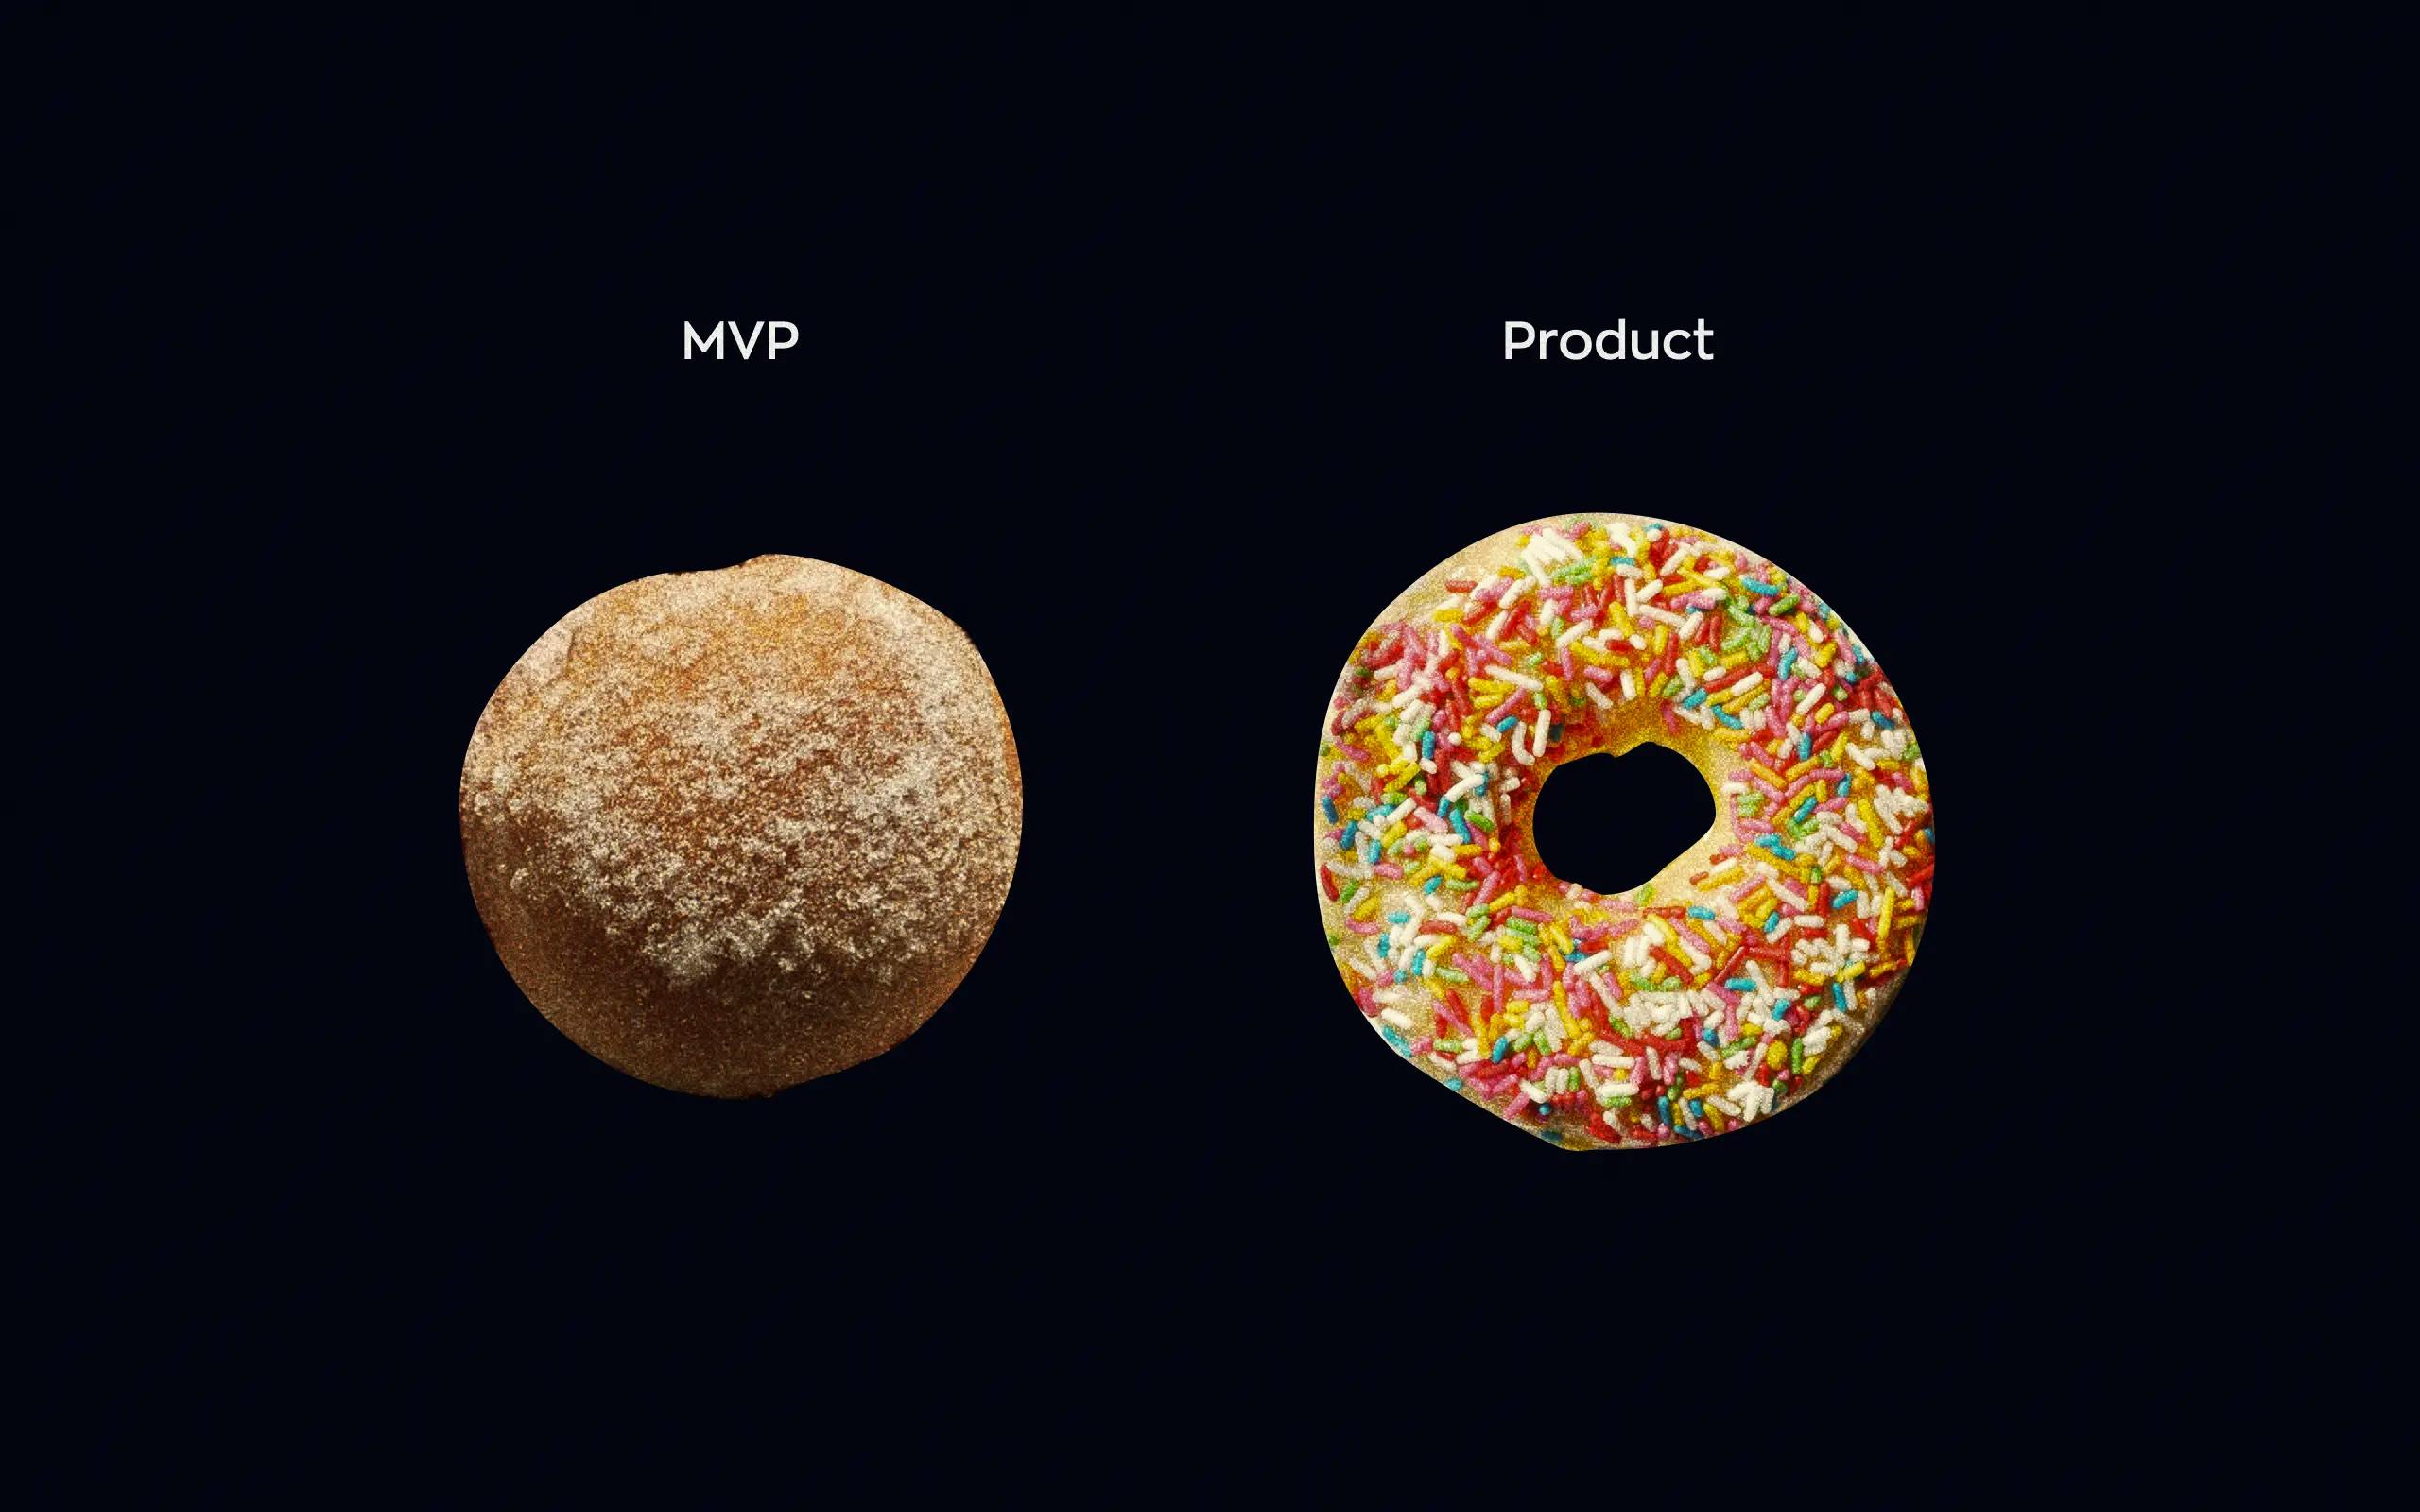 Comparing MVP software design to creating a pair of donuts